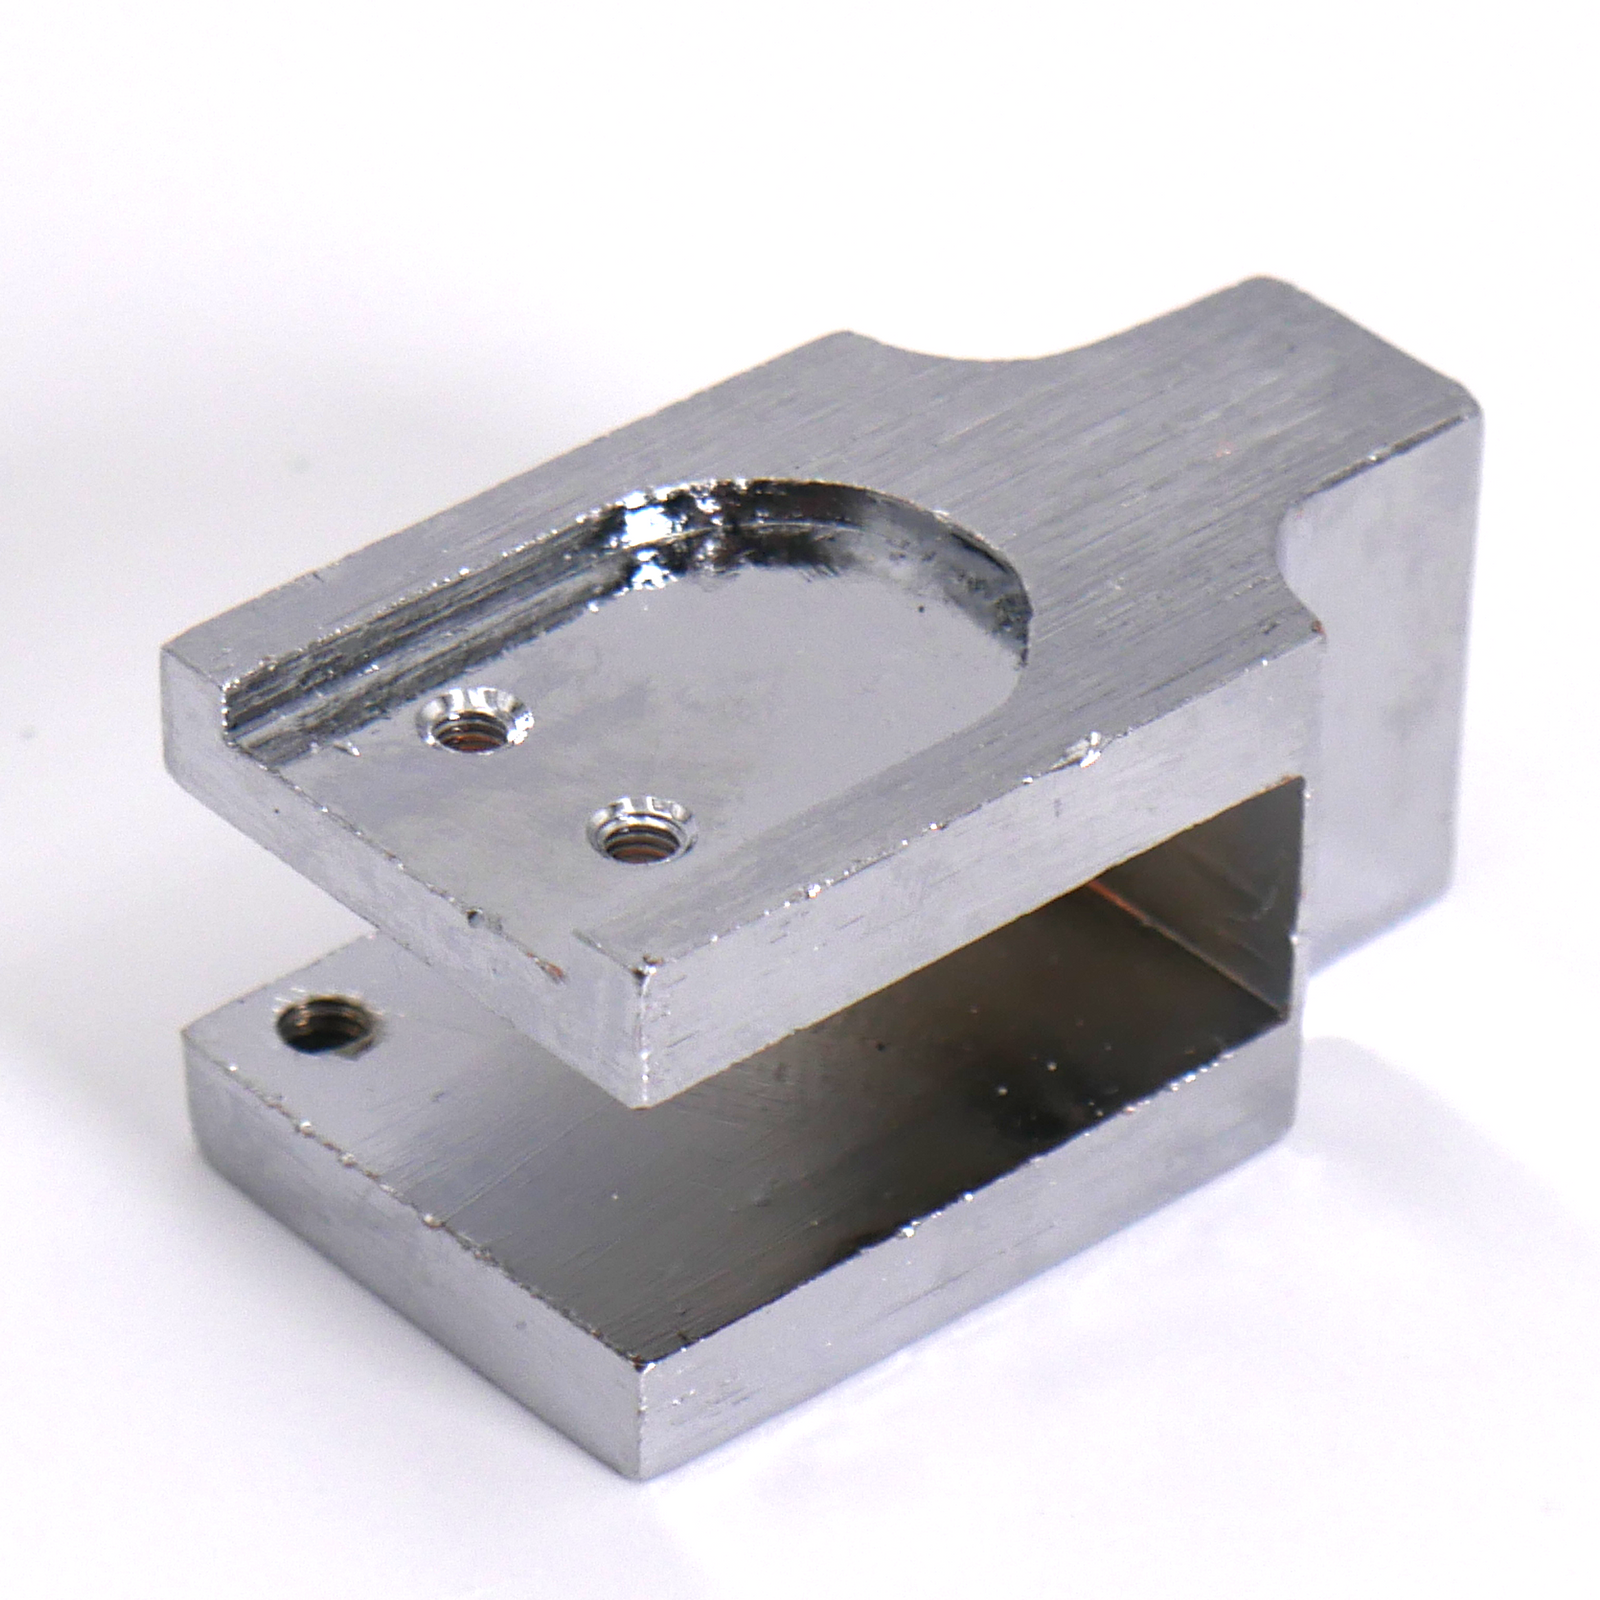 Metal cutting blade holder used in a JORES TECHNOLOGIES®  Impulse sealer with integrated cutter